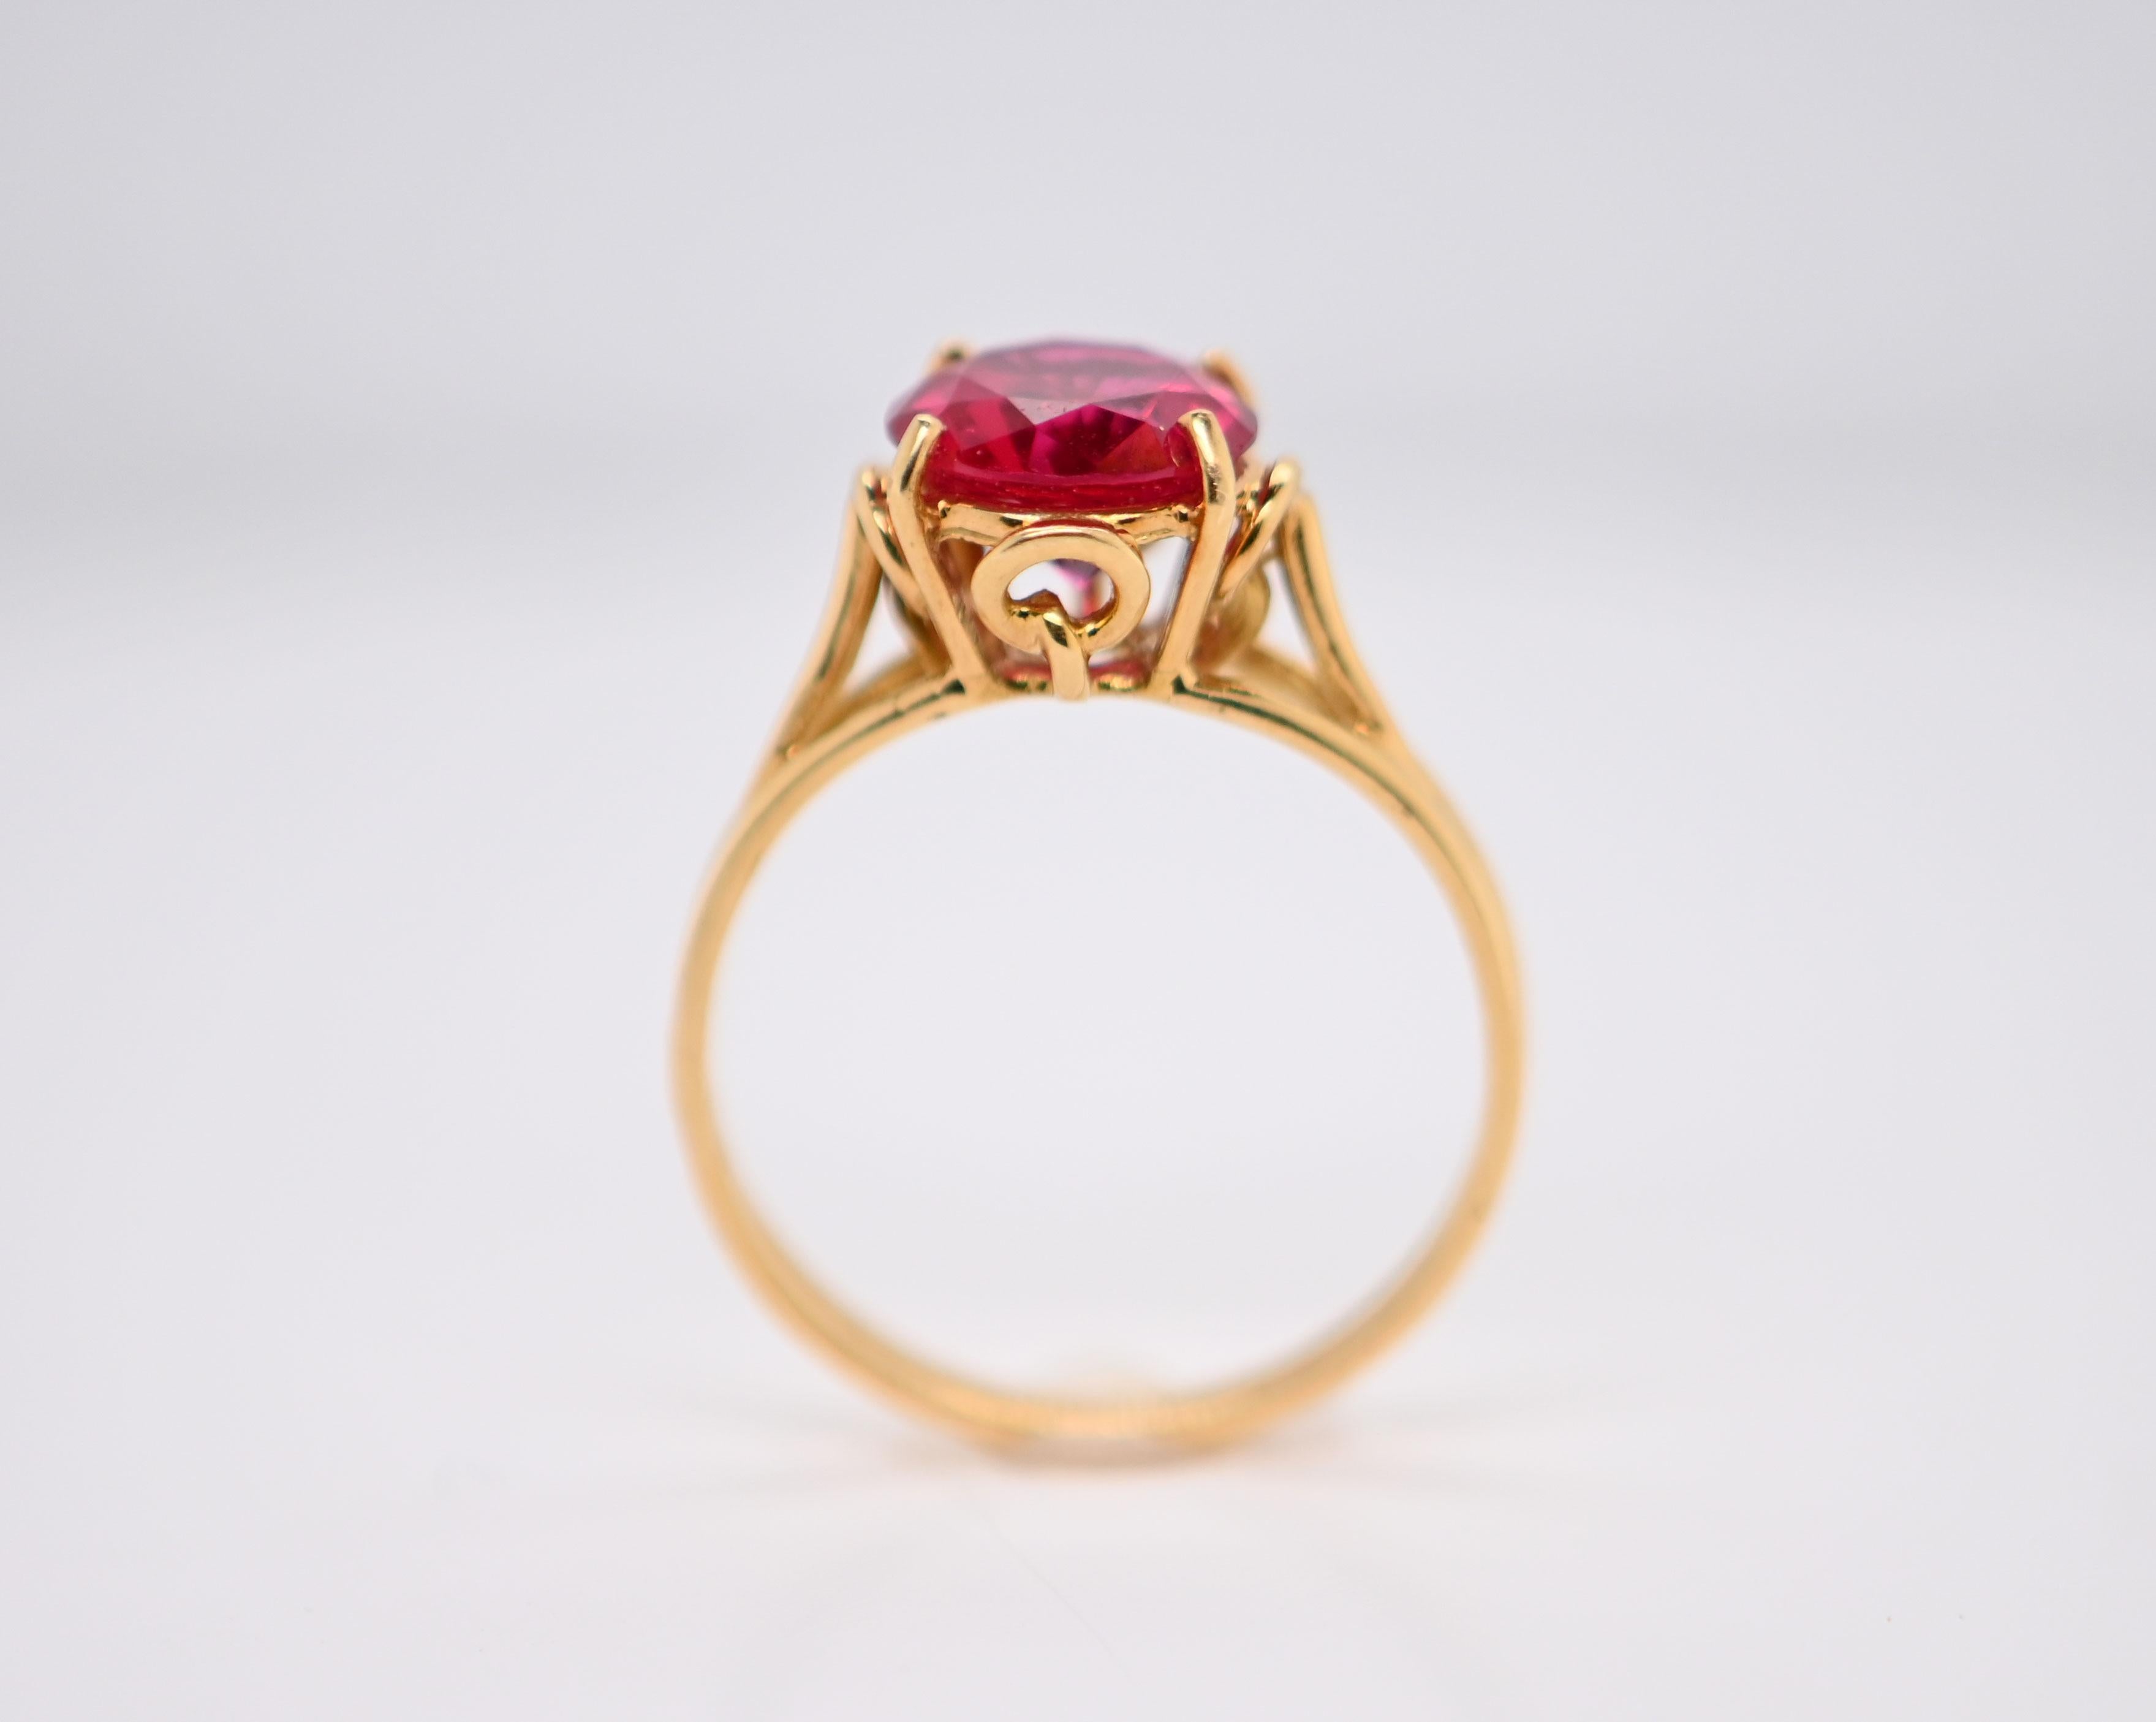 Immerse yourself in timeless opulence with this exquisite gold ring, featuring a rubellite solitaire. This exceptional, carefully crafted piece is a testament to refined craftsmanship and subtle luxury.

Material: 18-carat gold
Main stone: